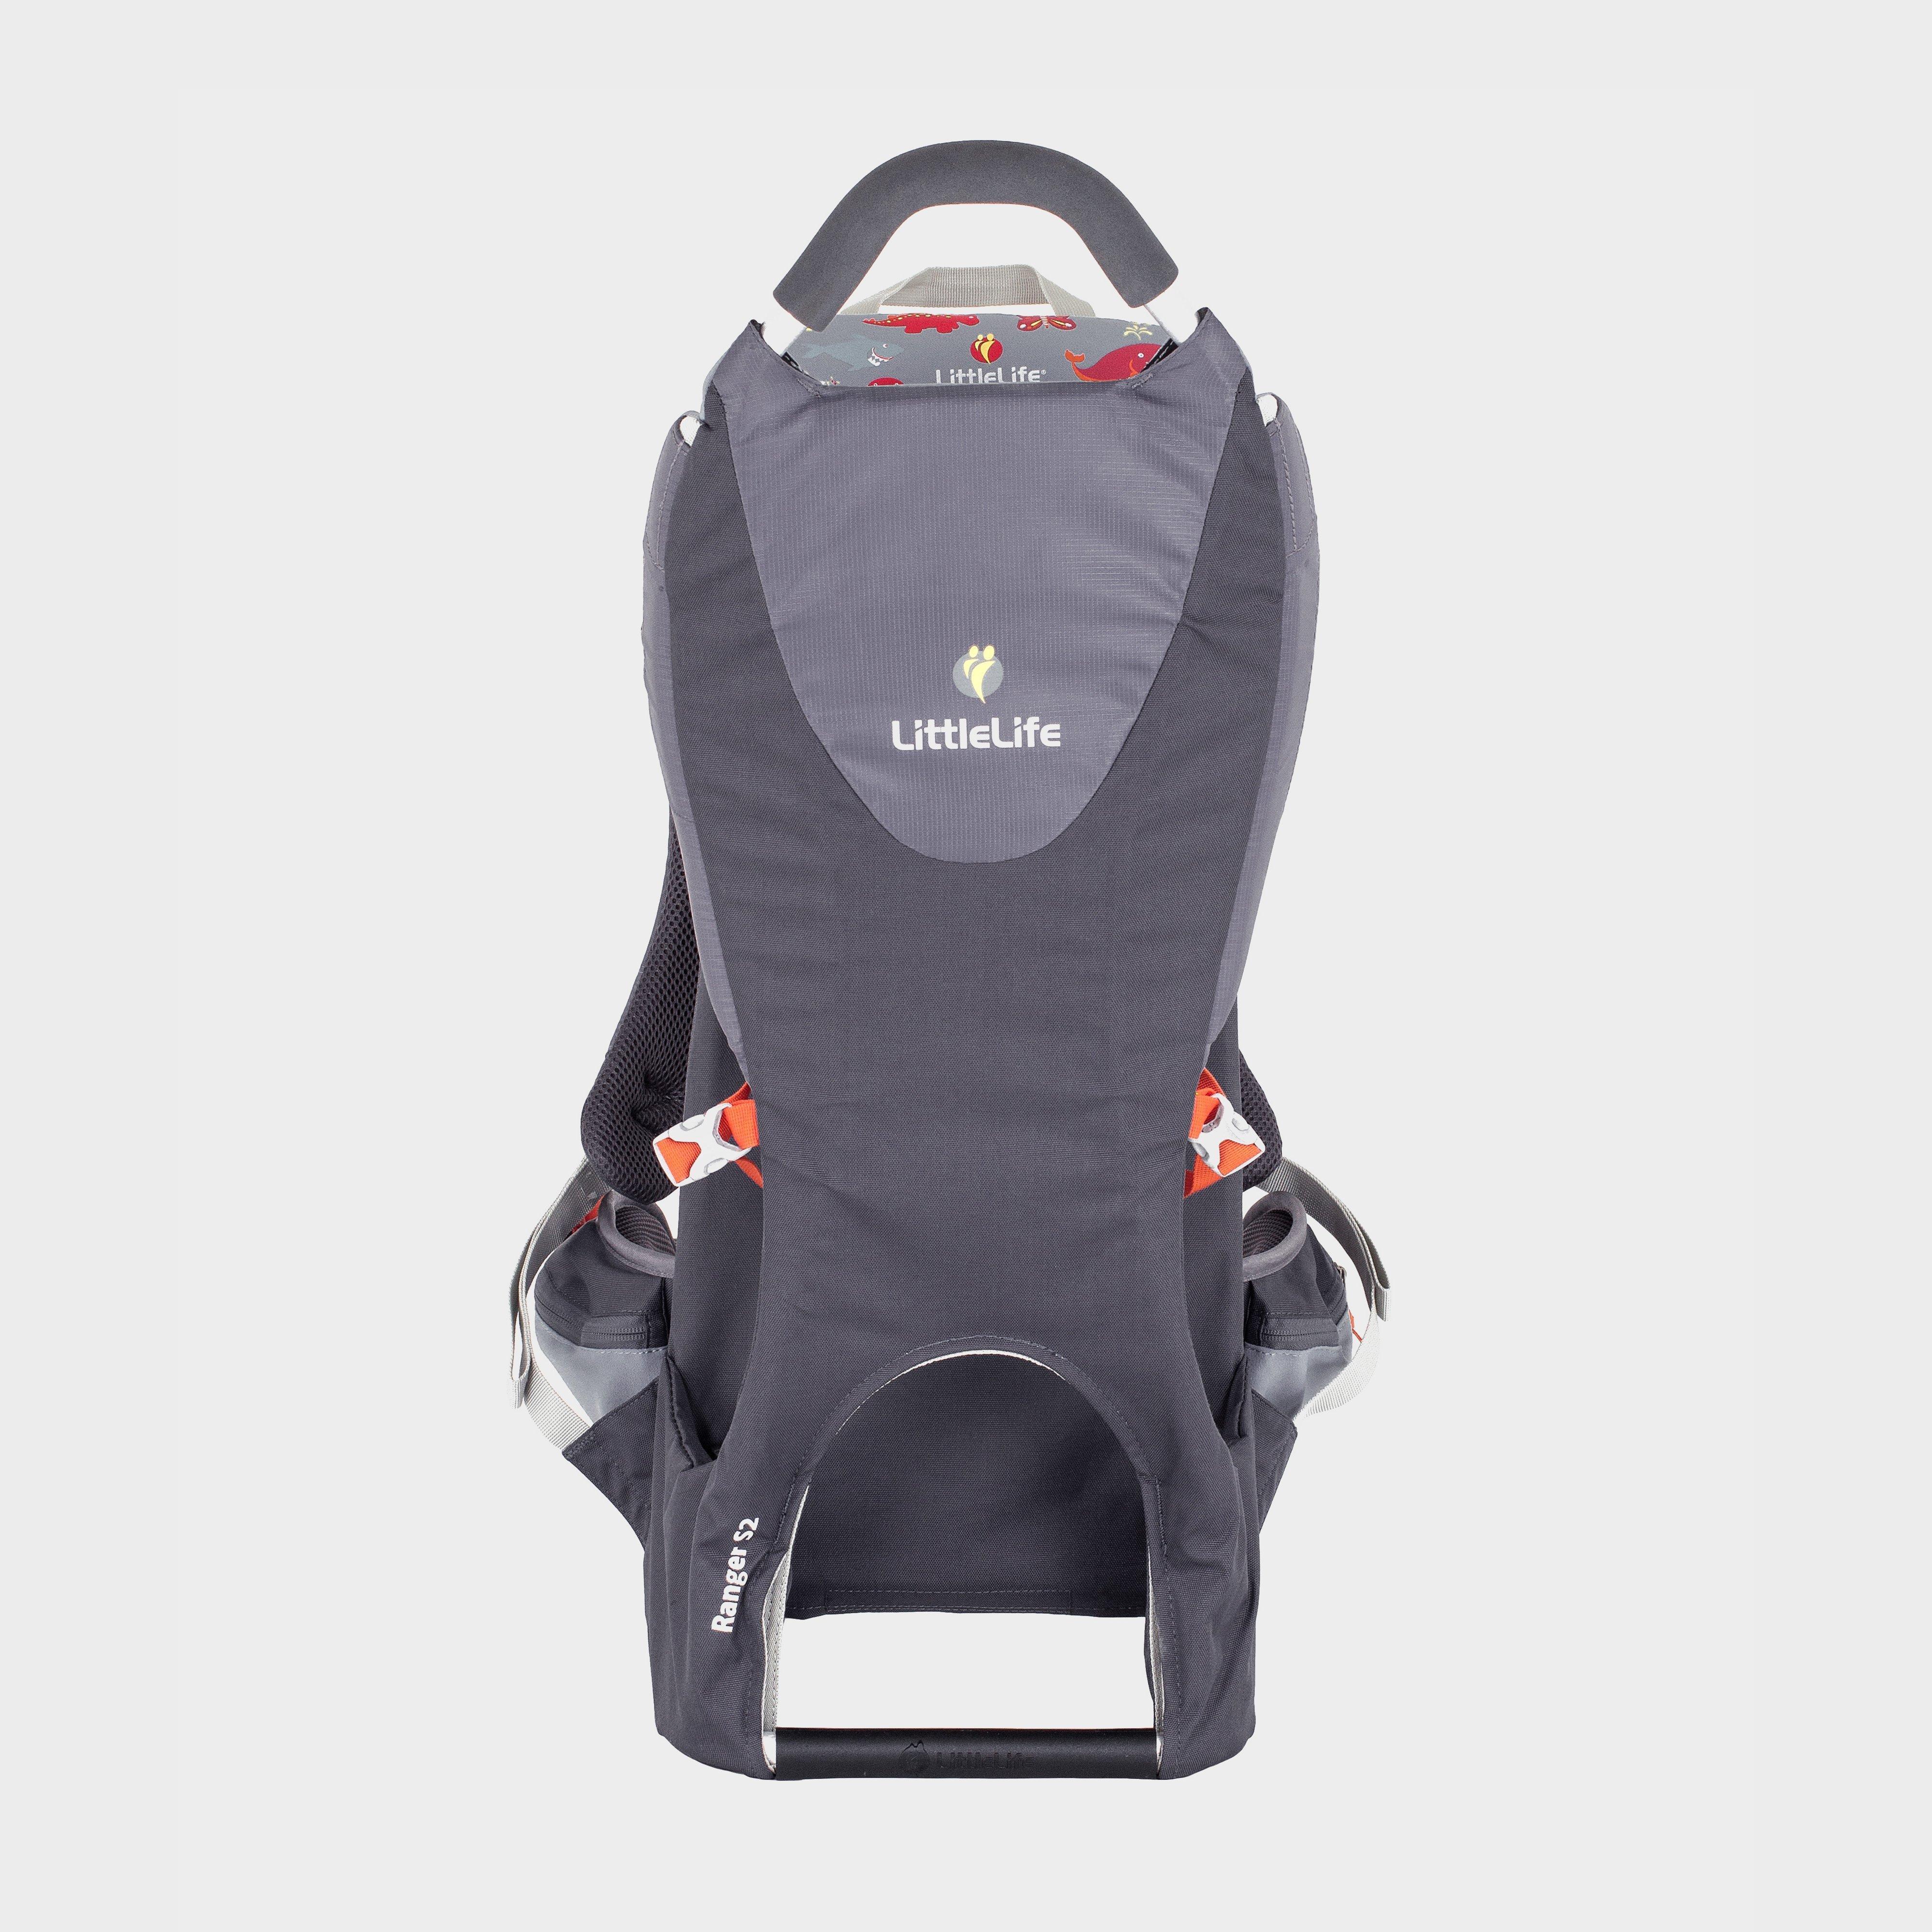 Littlelife Ranger S2 Child Carrier - Gry/gry  Gry/gry